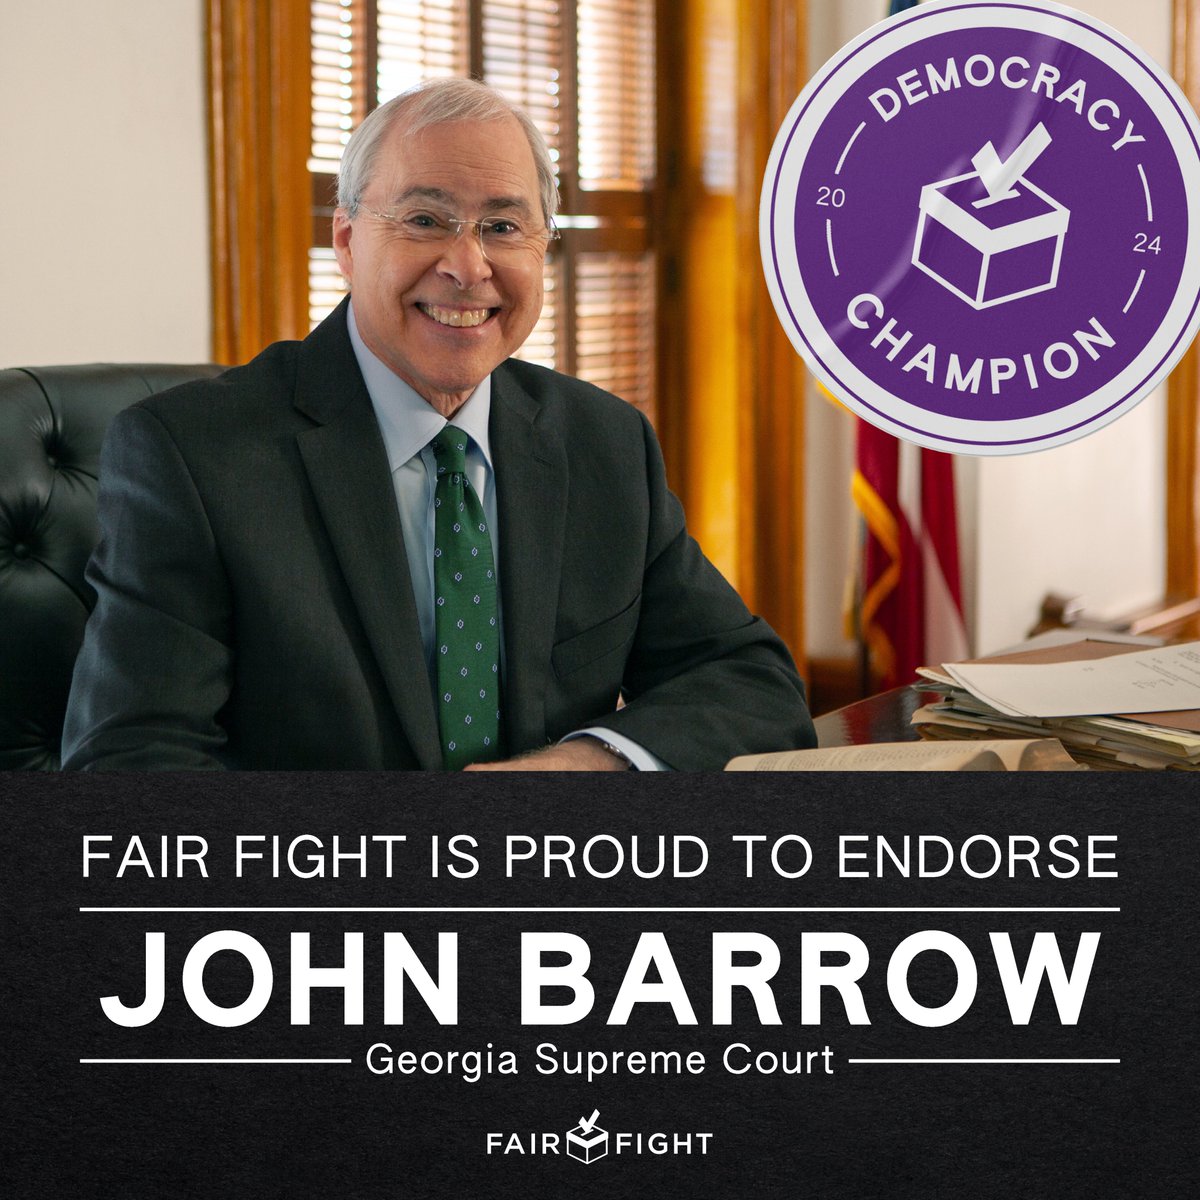 Fair Fight is proud to endorse John Barrow in the May 21 GA Supreme Court election. As MAGA extremists continue to strip away our most basic freedoms, GA needs a pro-choice & pro-voter voice on the GA Supreme Court- John Barrow will be that voice.